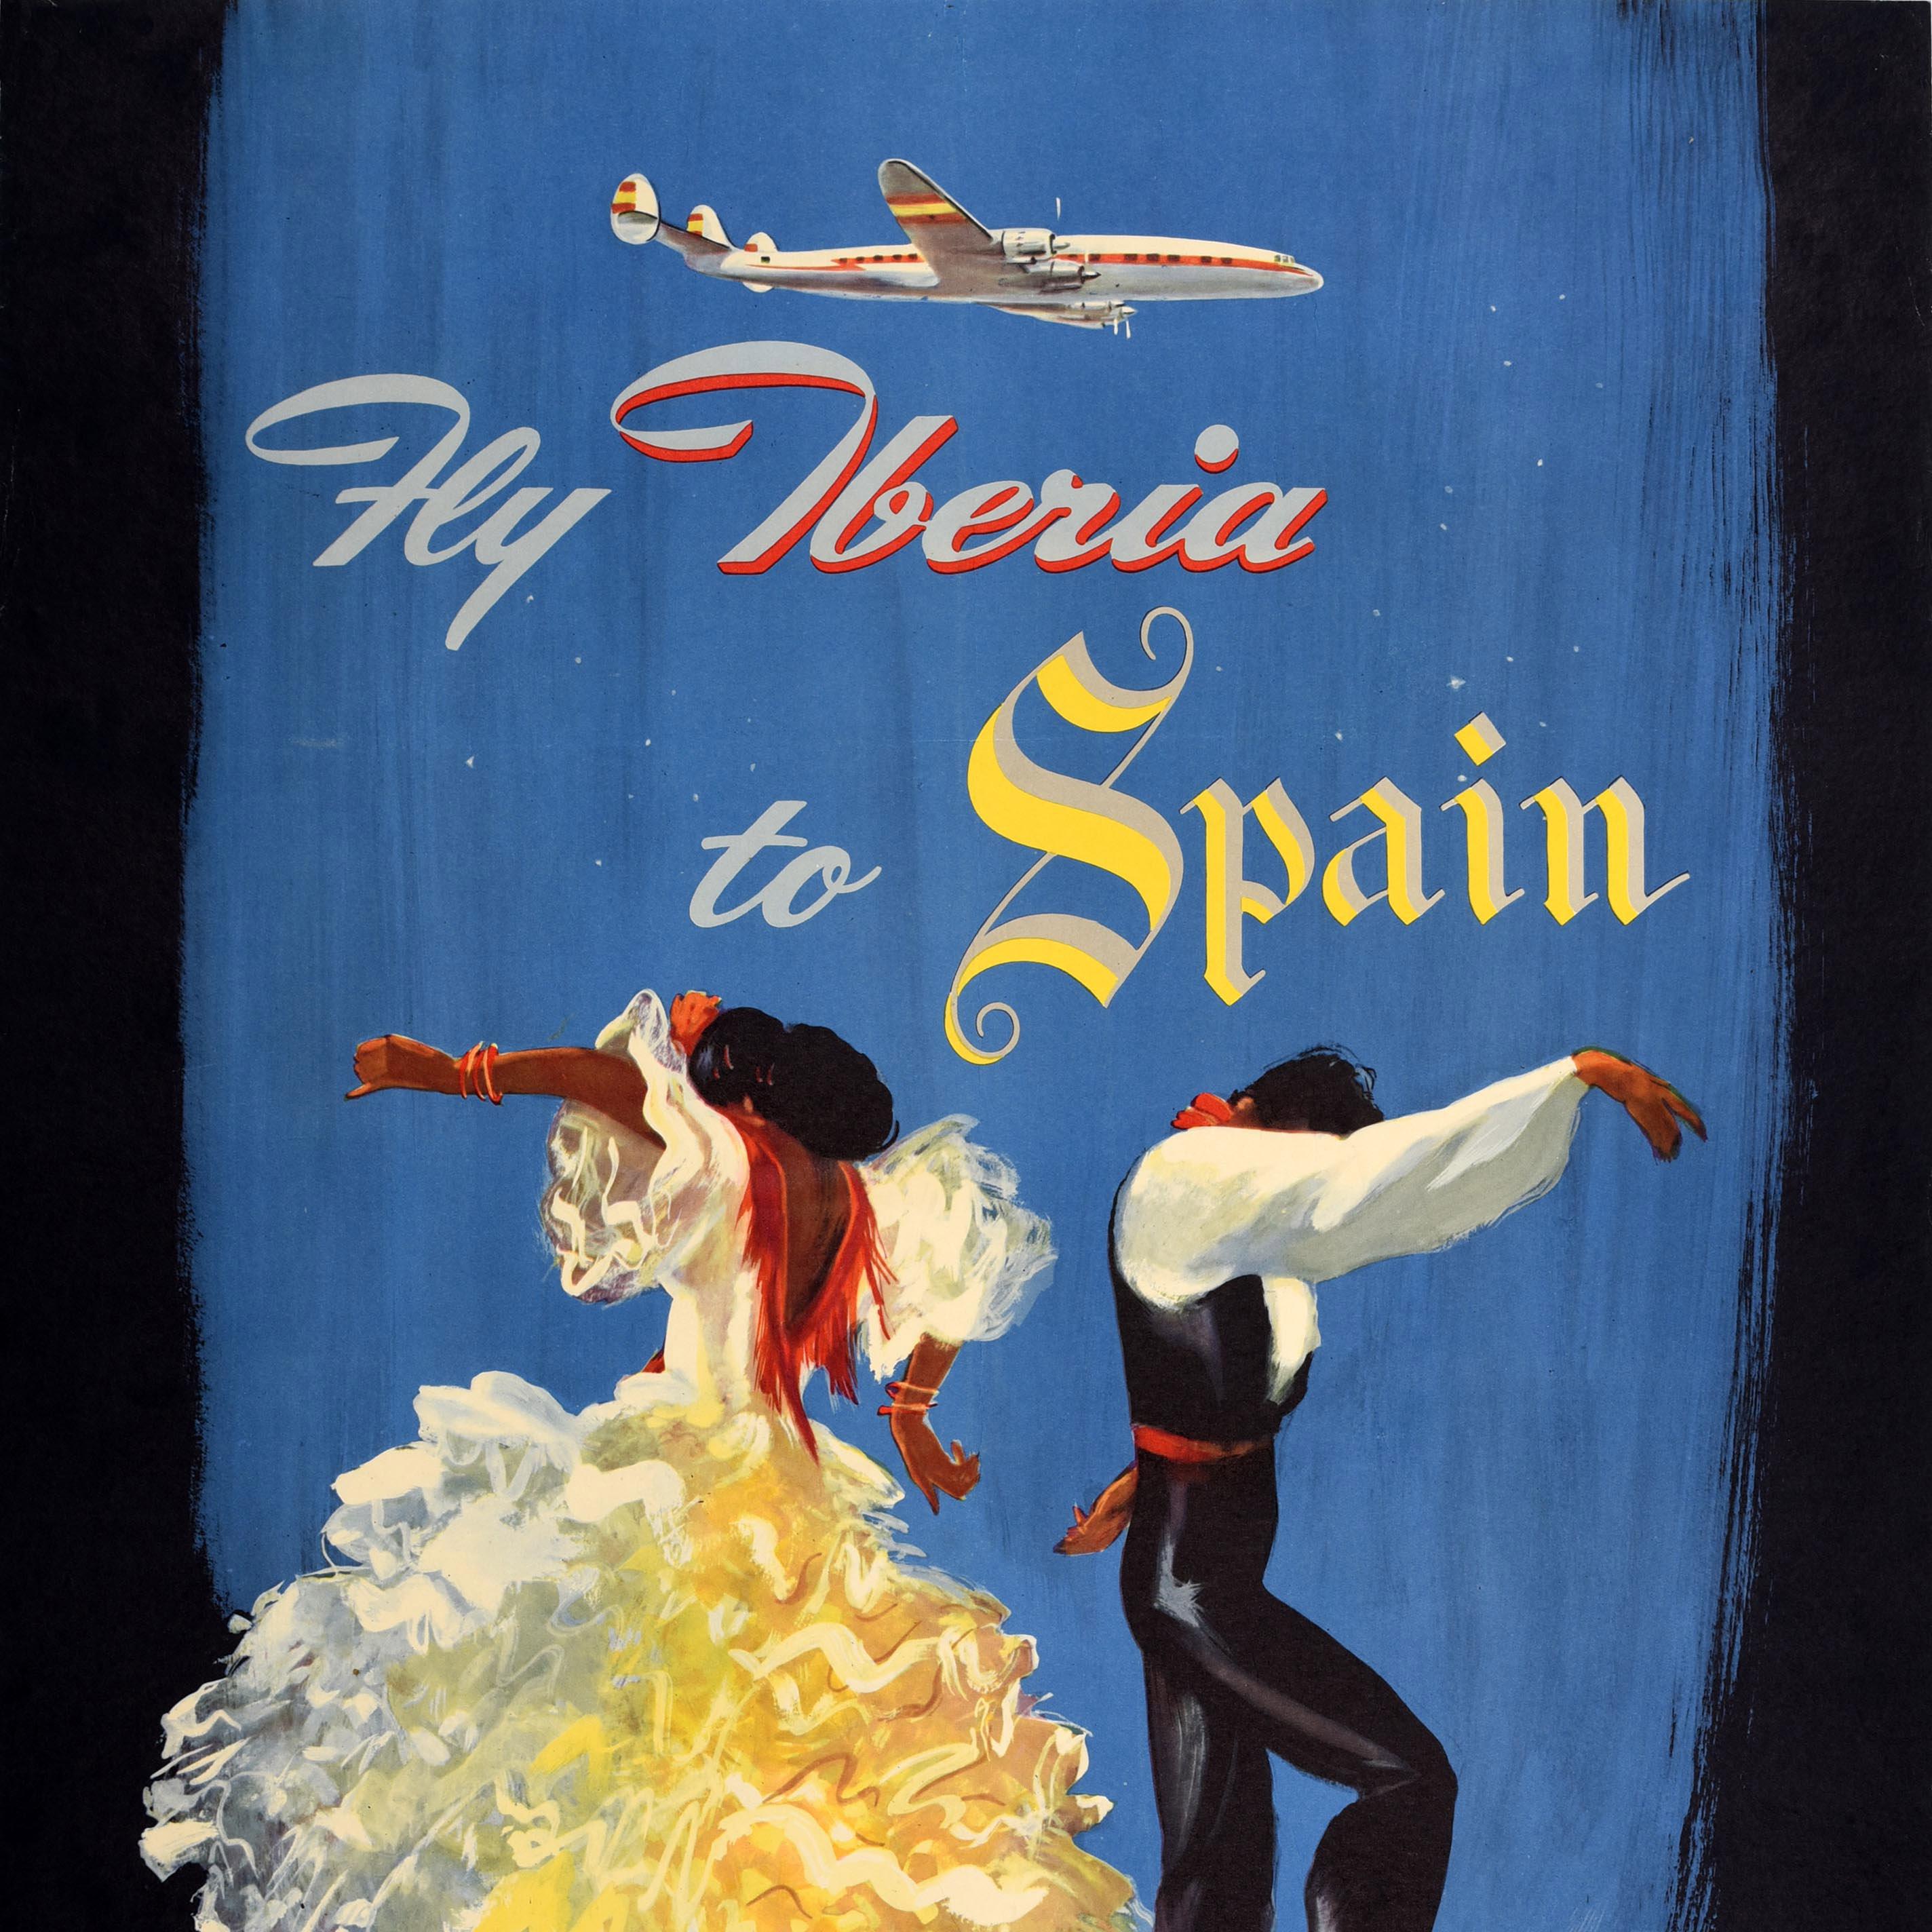 Original vintage travel poster - Fly Iberia to Spain - featuring artwork of two flamenco dancers dancing back to back in traditional dress, the lady wearing a yellow ruffled dress and the man in black with a red waistband and neck scarf, beneath the